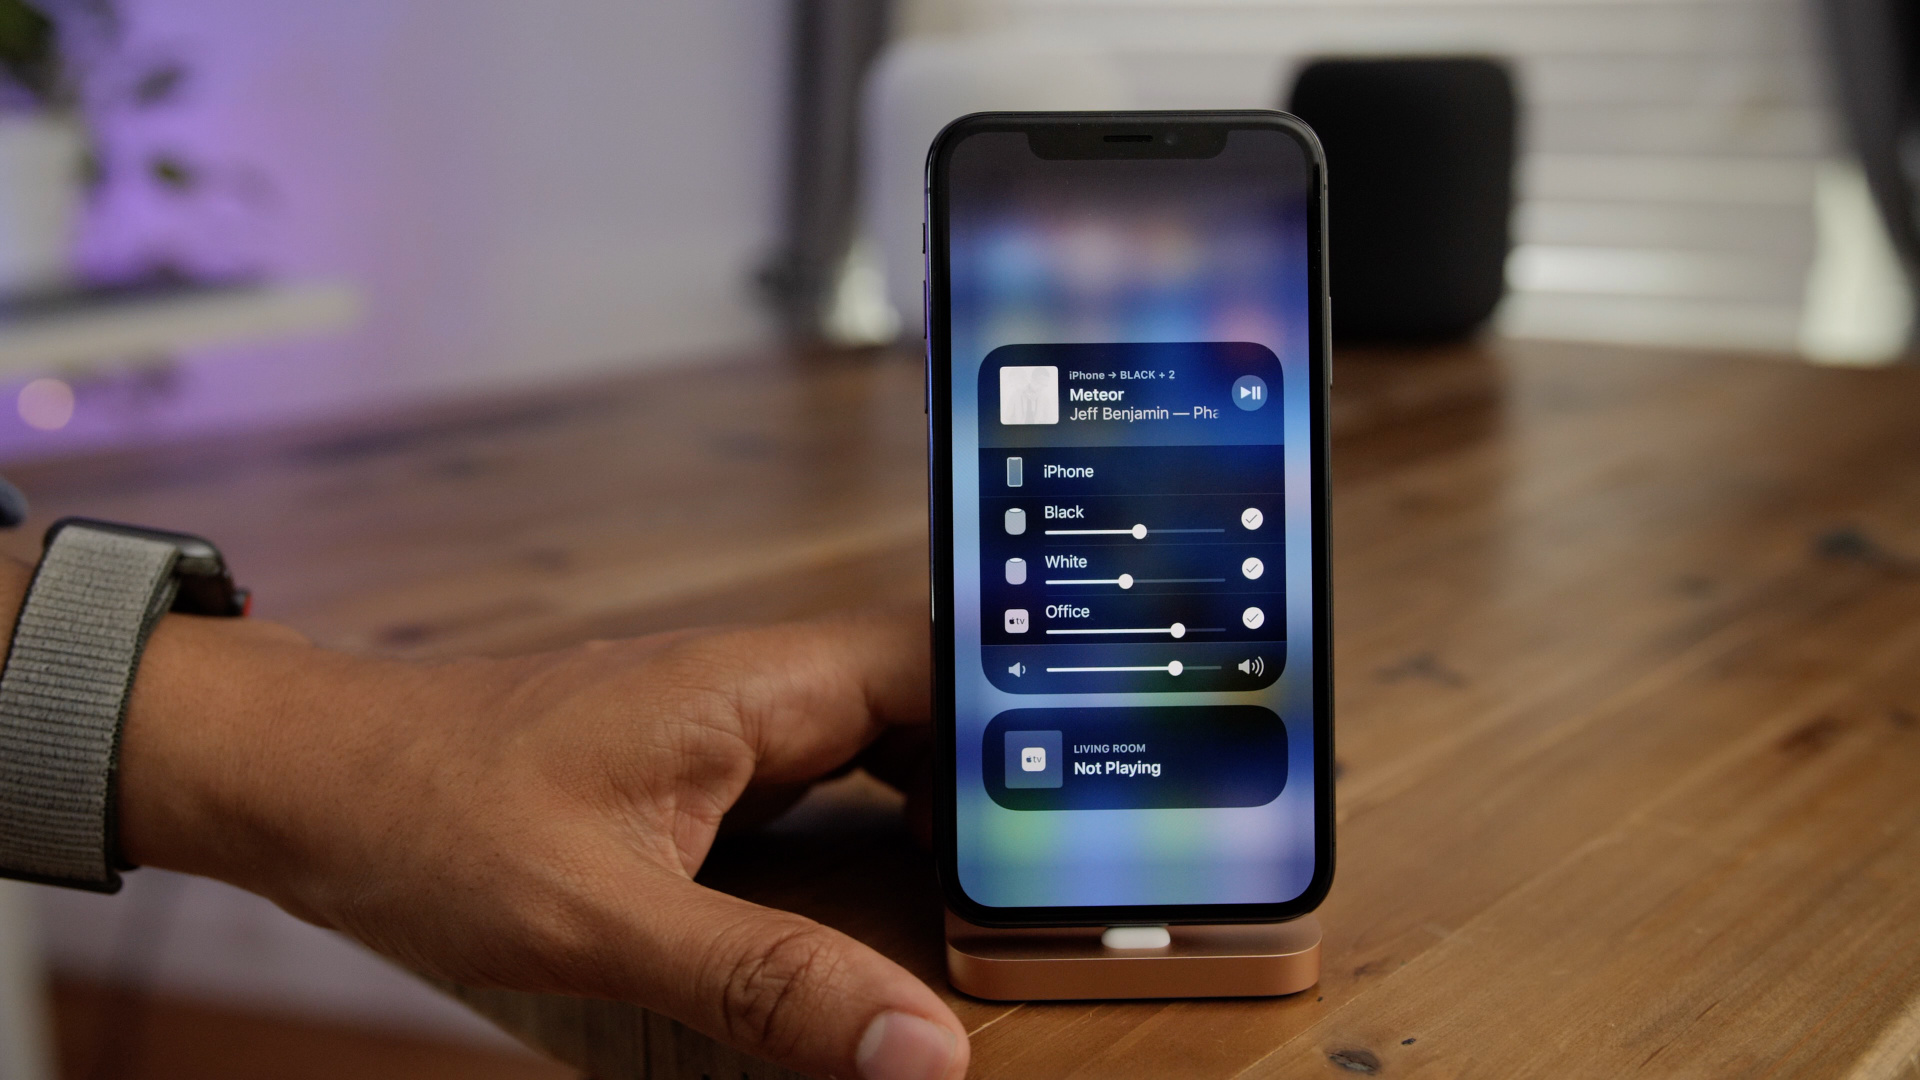 How to create a multi-room AirPlay 2 